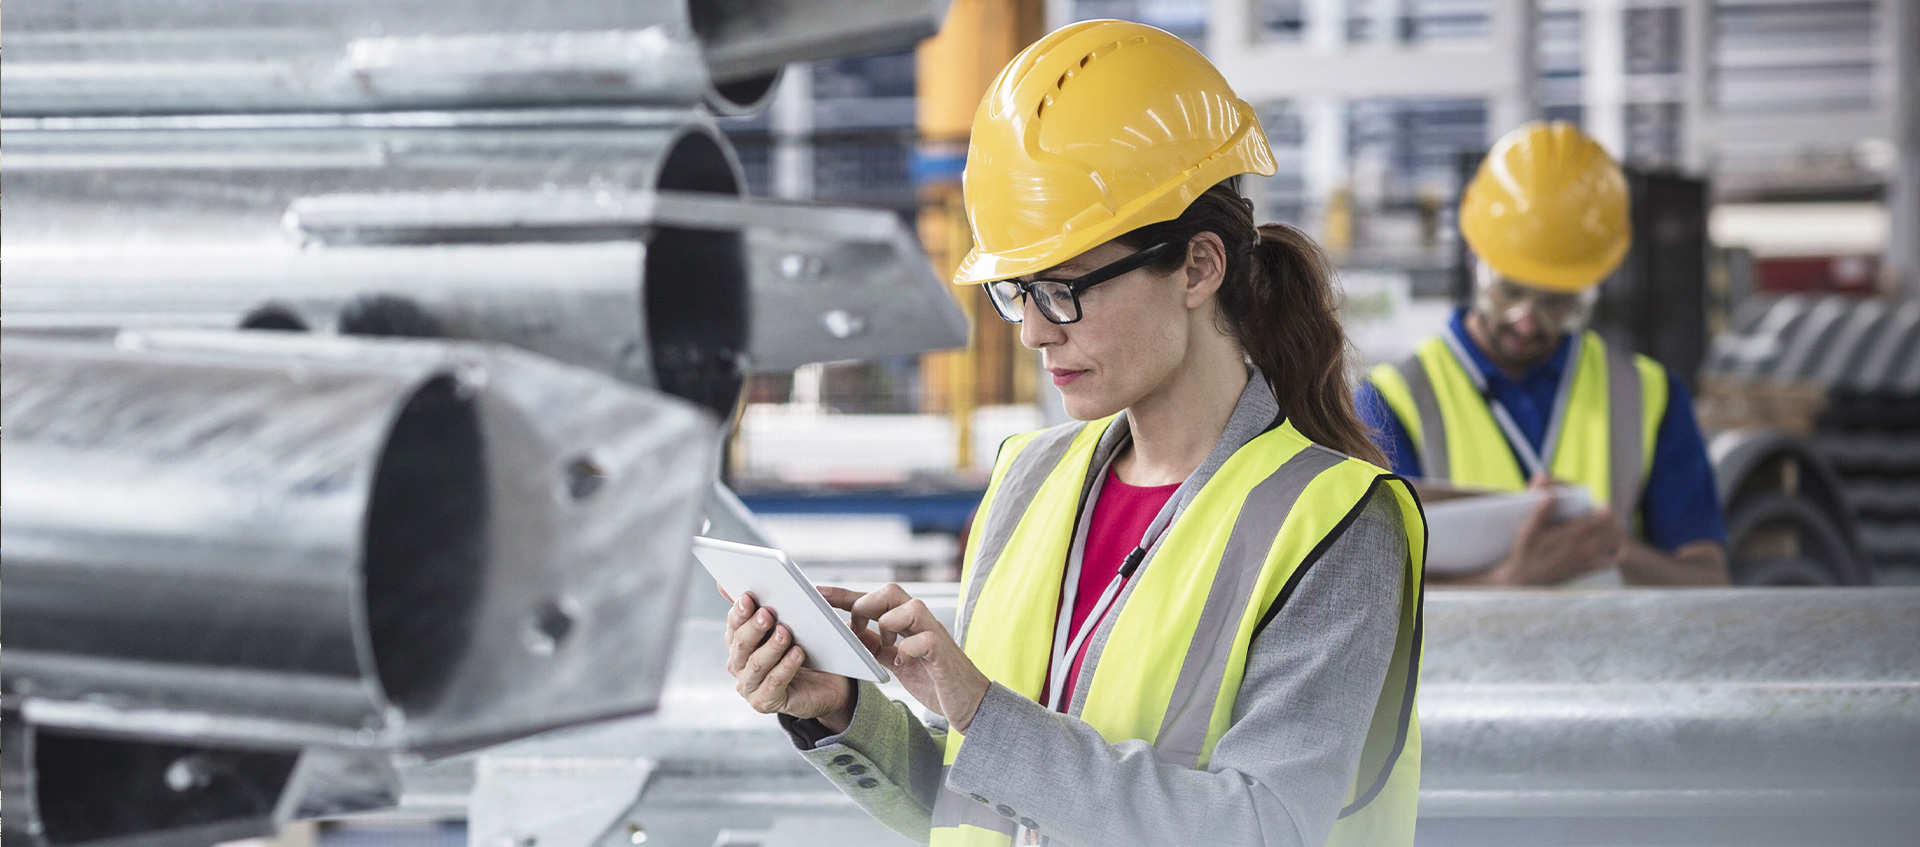 10 tips to ensure job safety in your production facility or warehouse